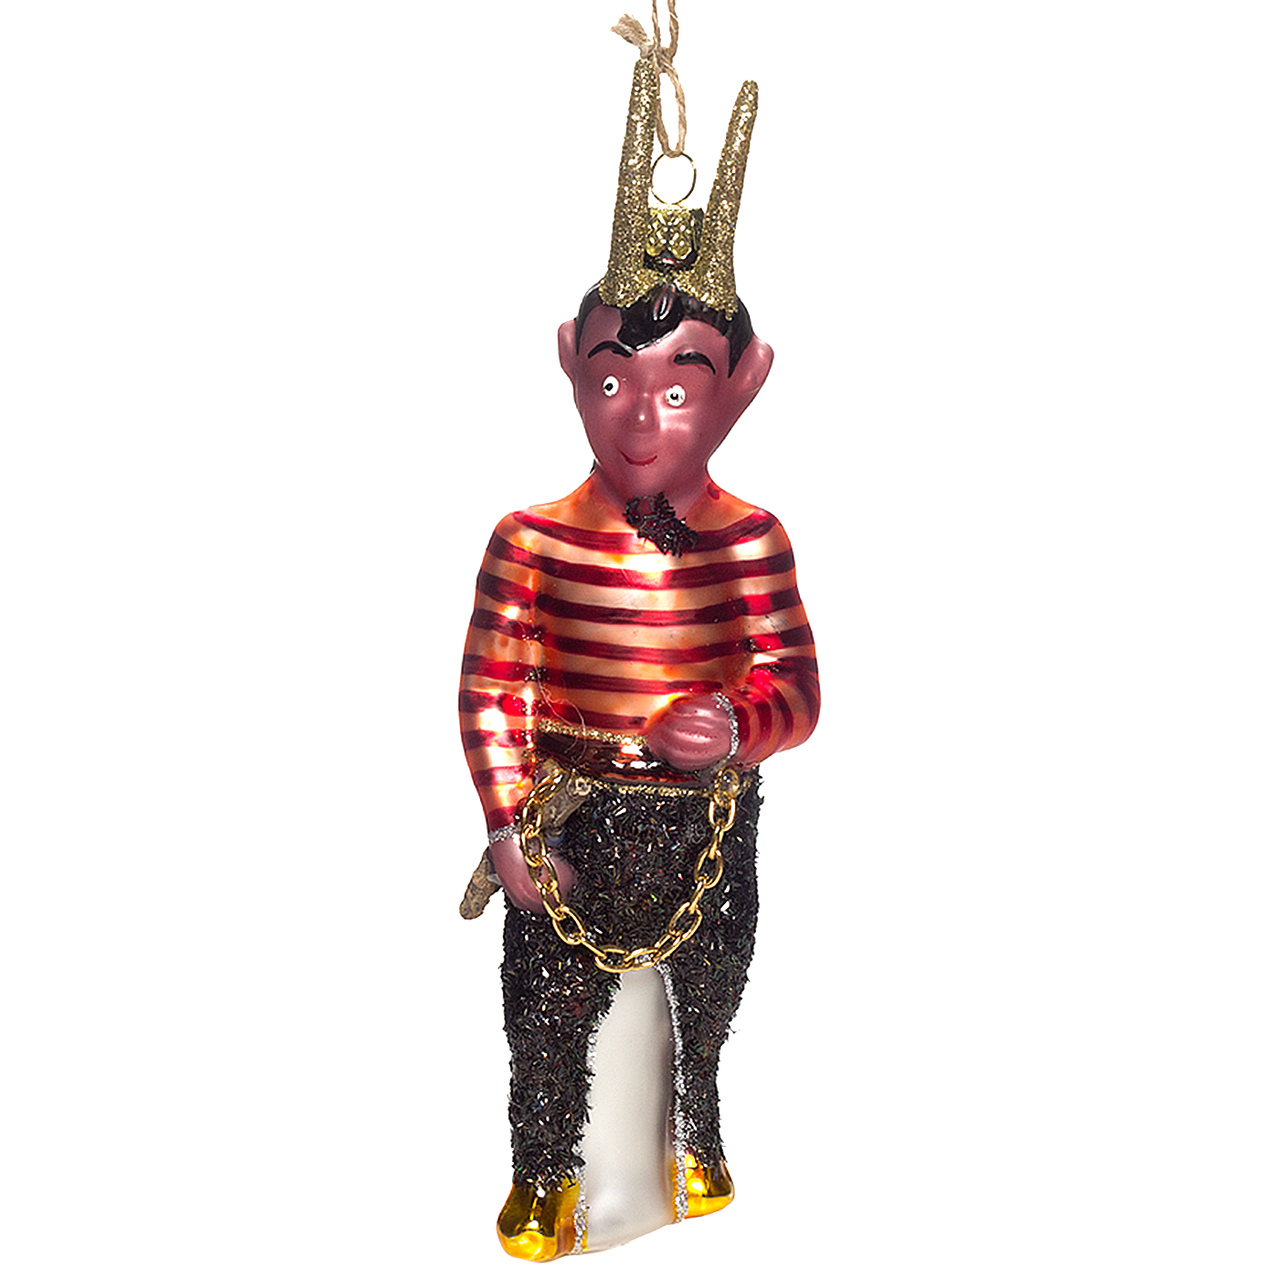 YOUNG KRAMPUS GLASS XMAS ORNAMENT